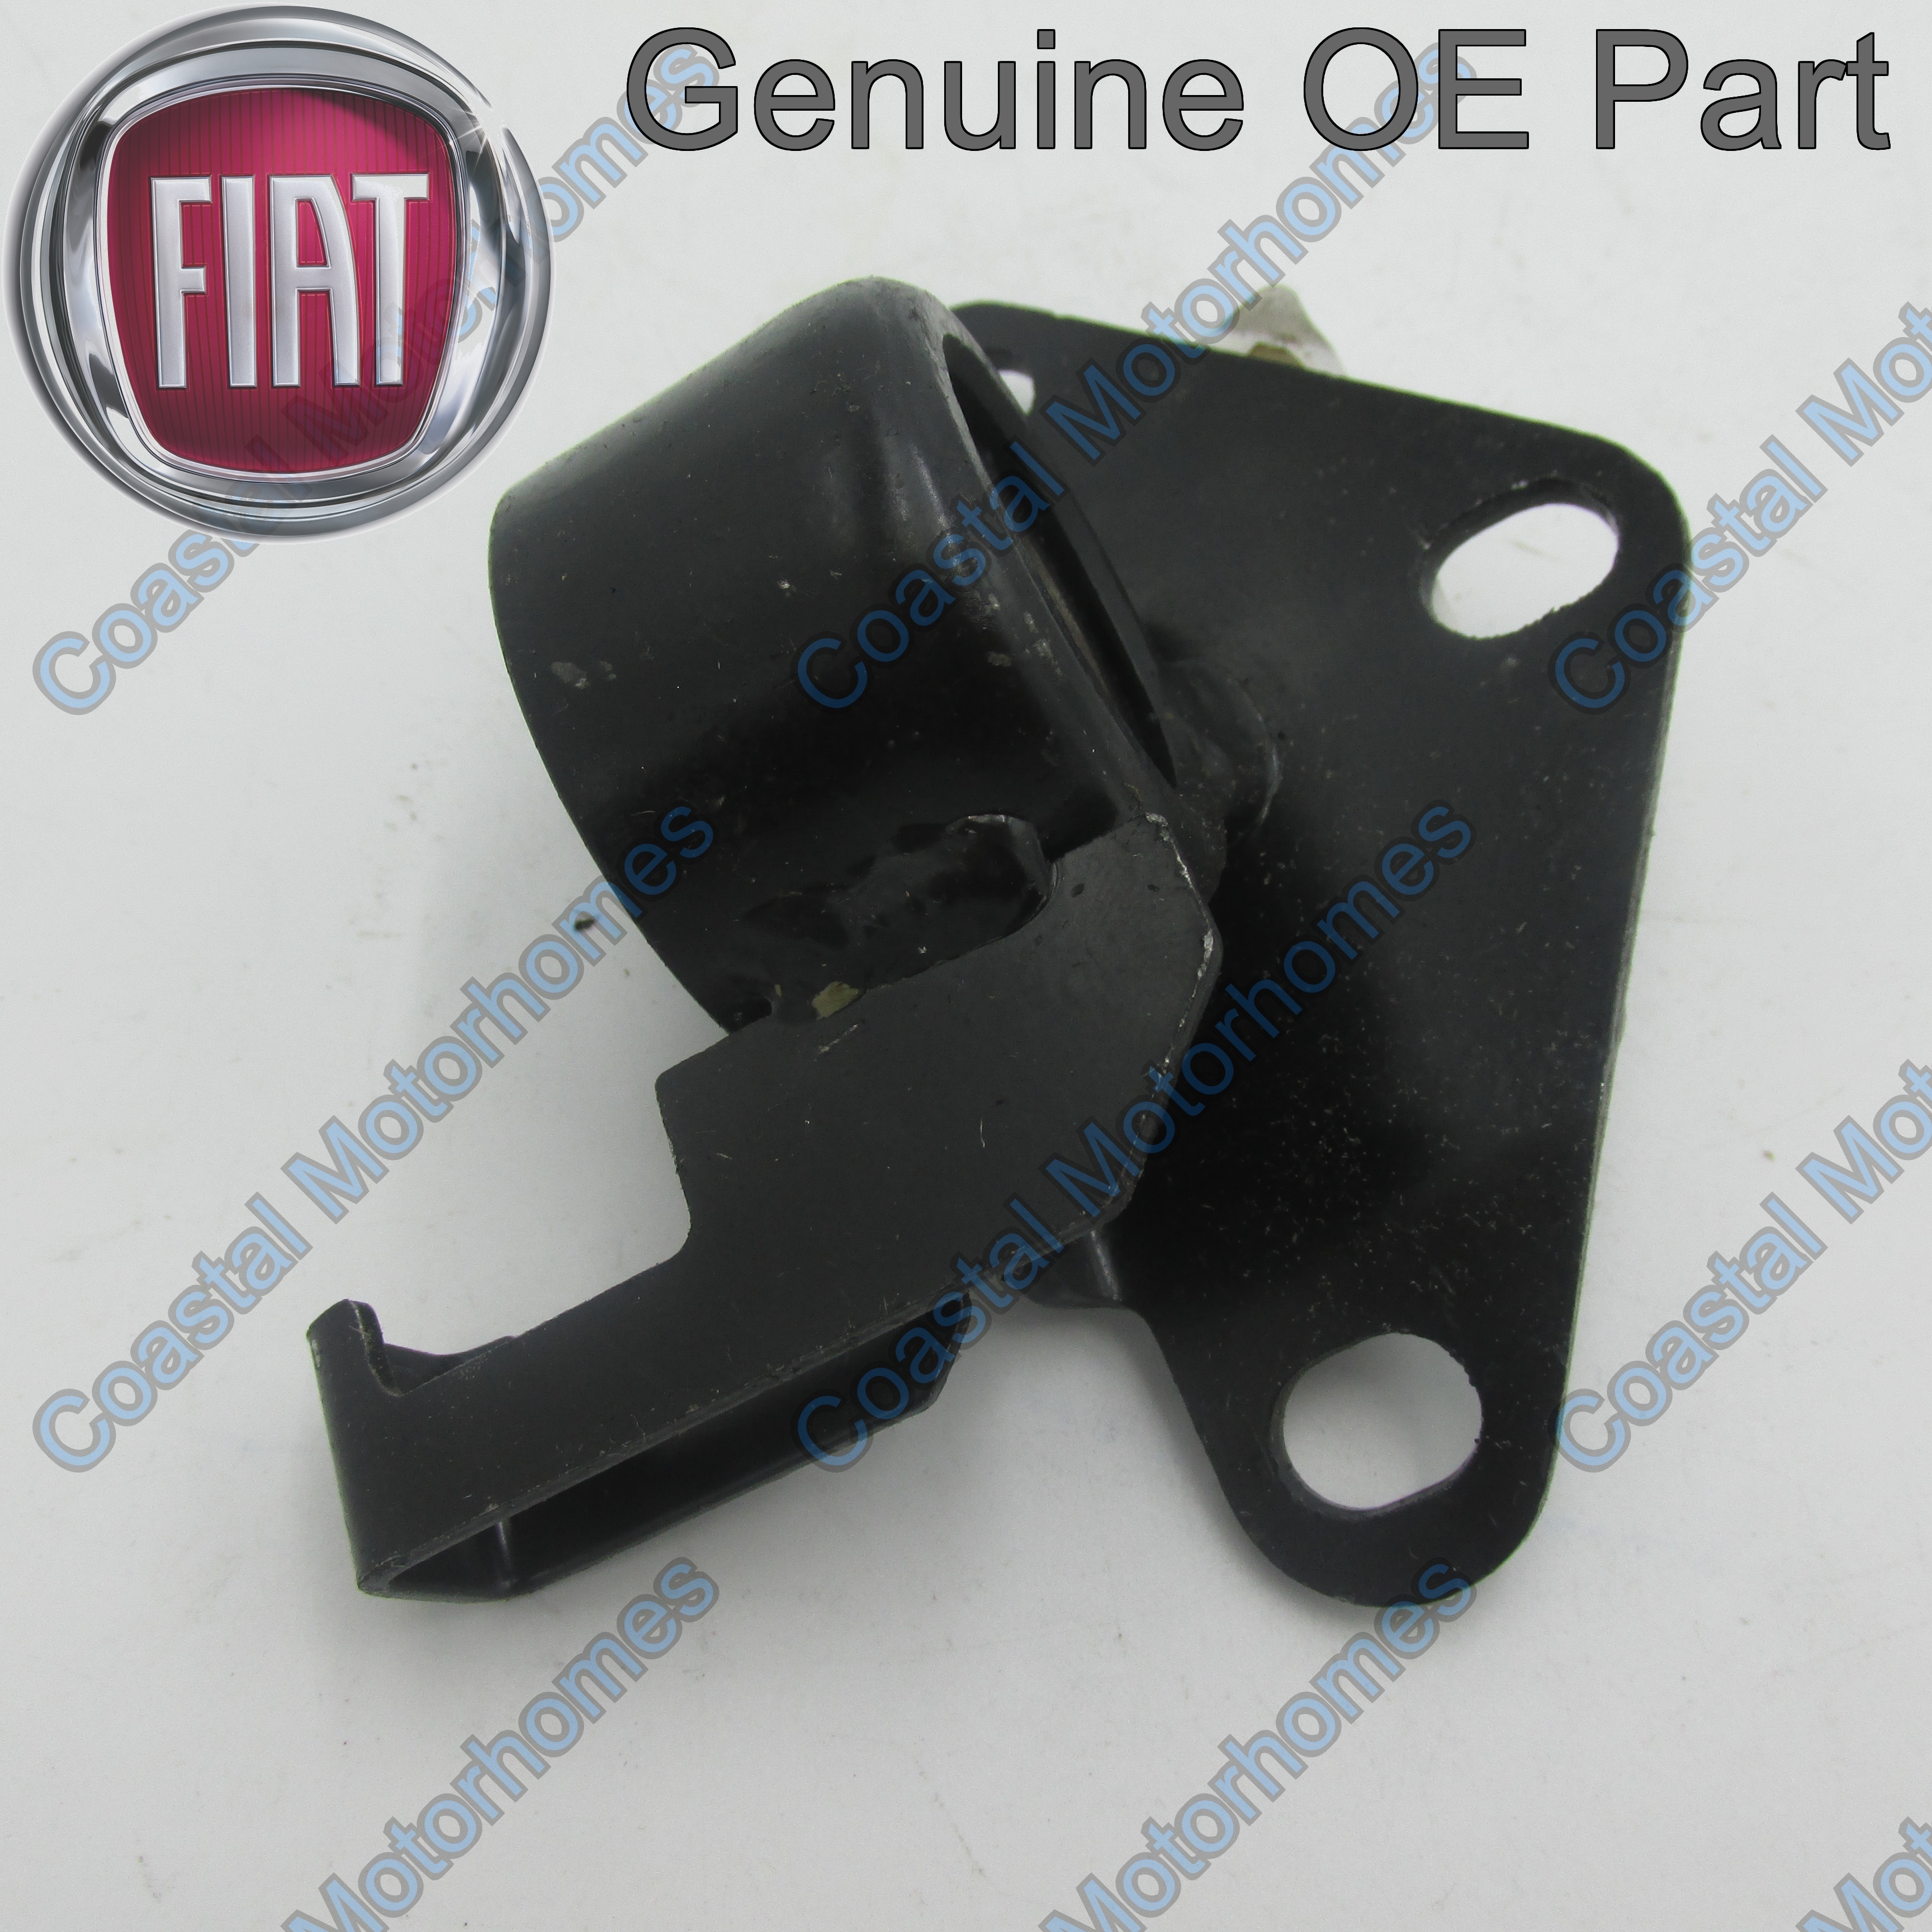 C25 Gear Linkage EXCHANGE GEARBOX COLLAR MODIFICATION TALBOT EXPRESS /DUCATO 